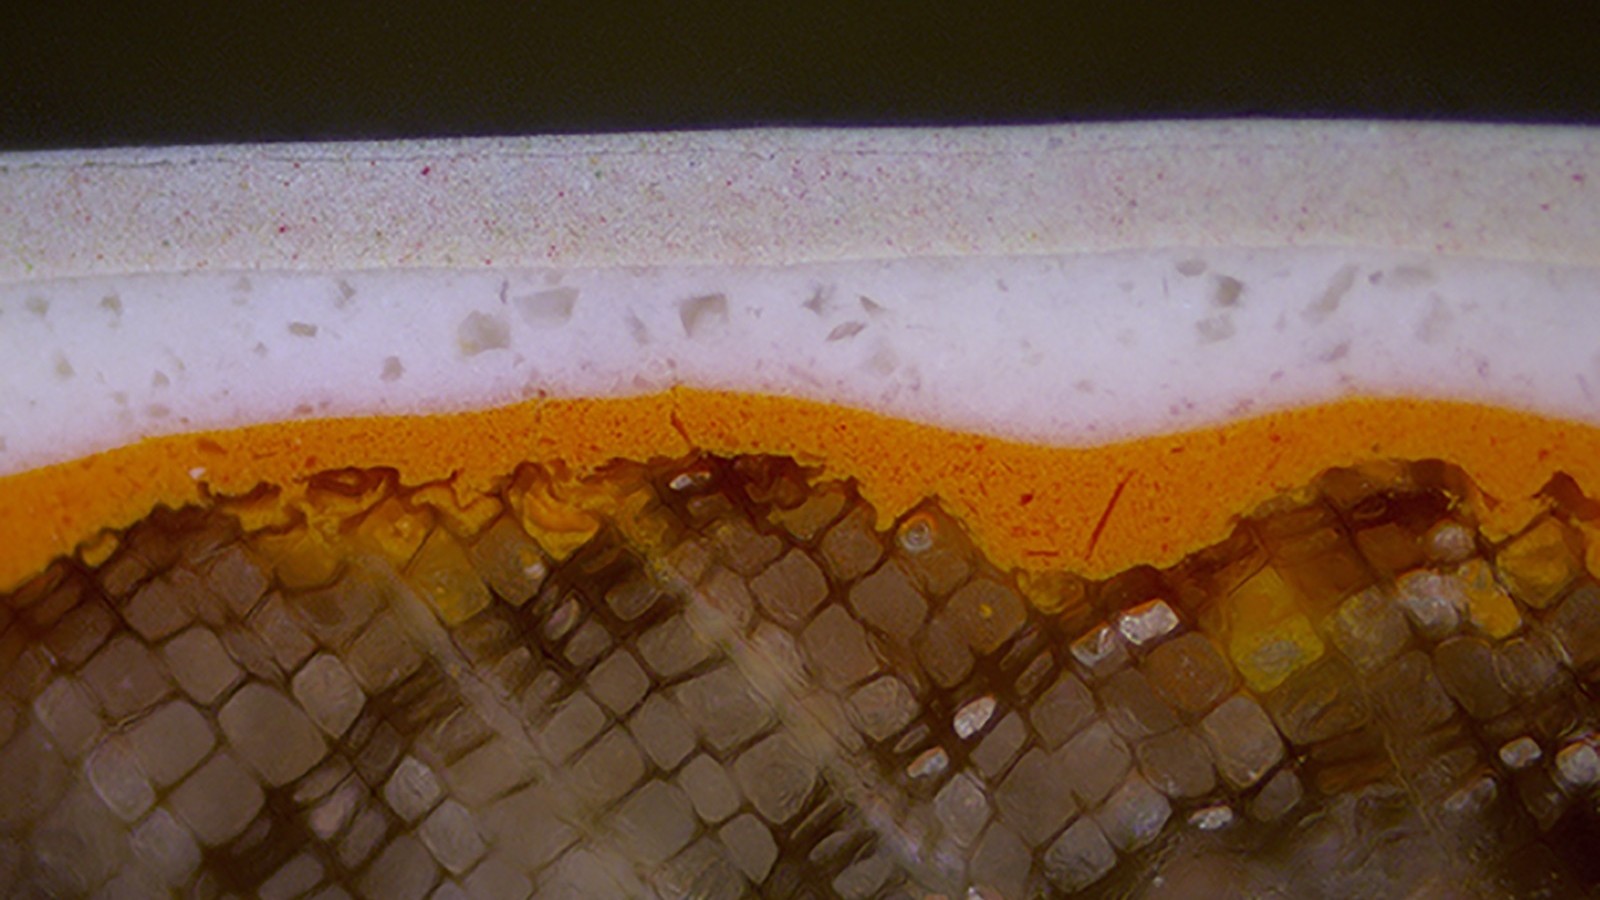 Cross sectional microscope image of the paint layers